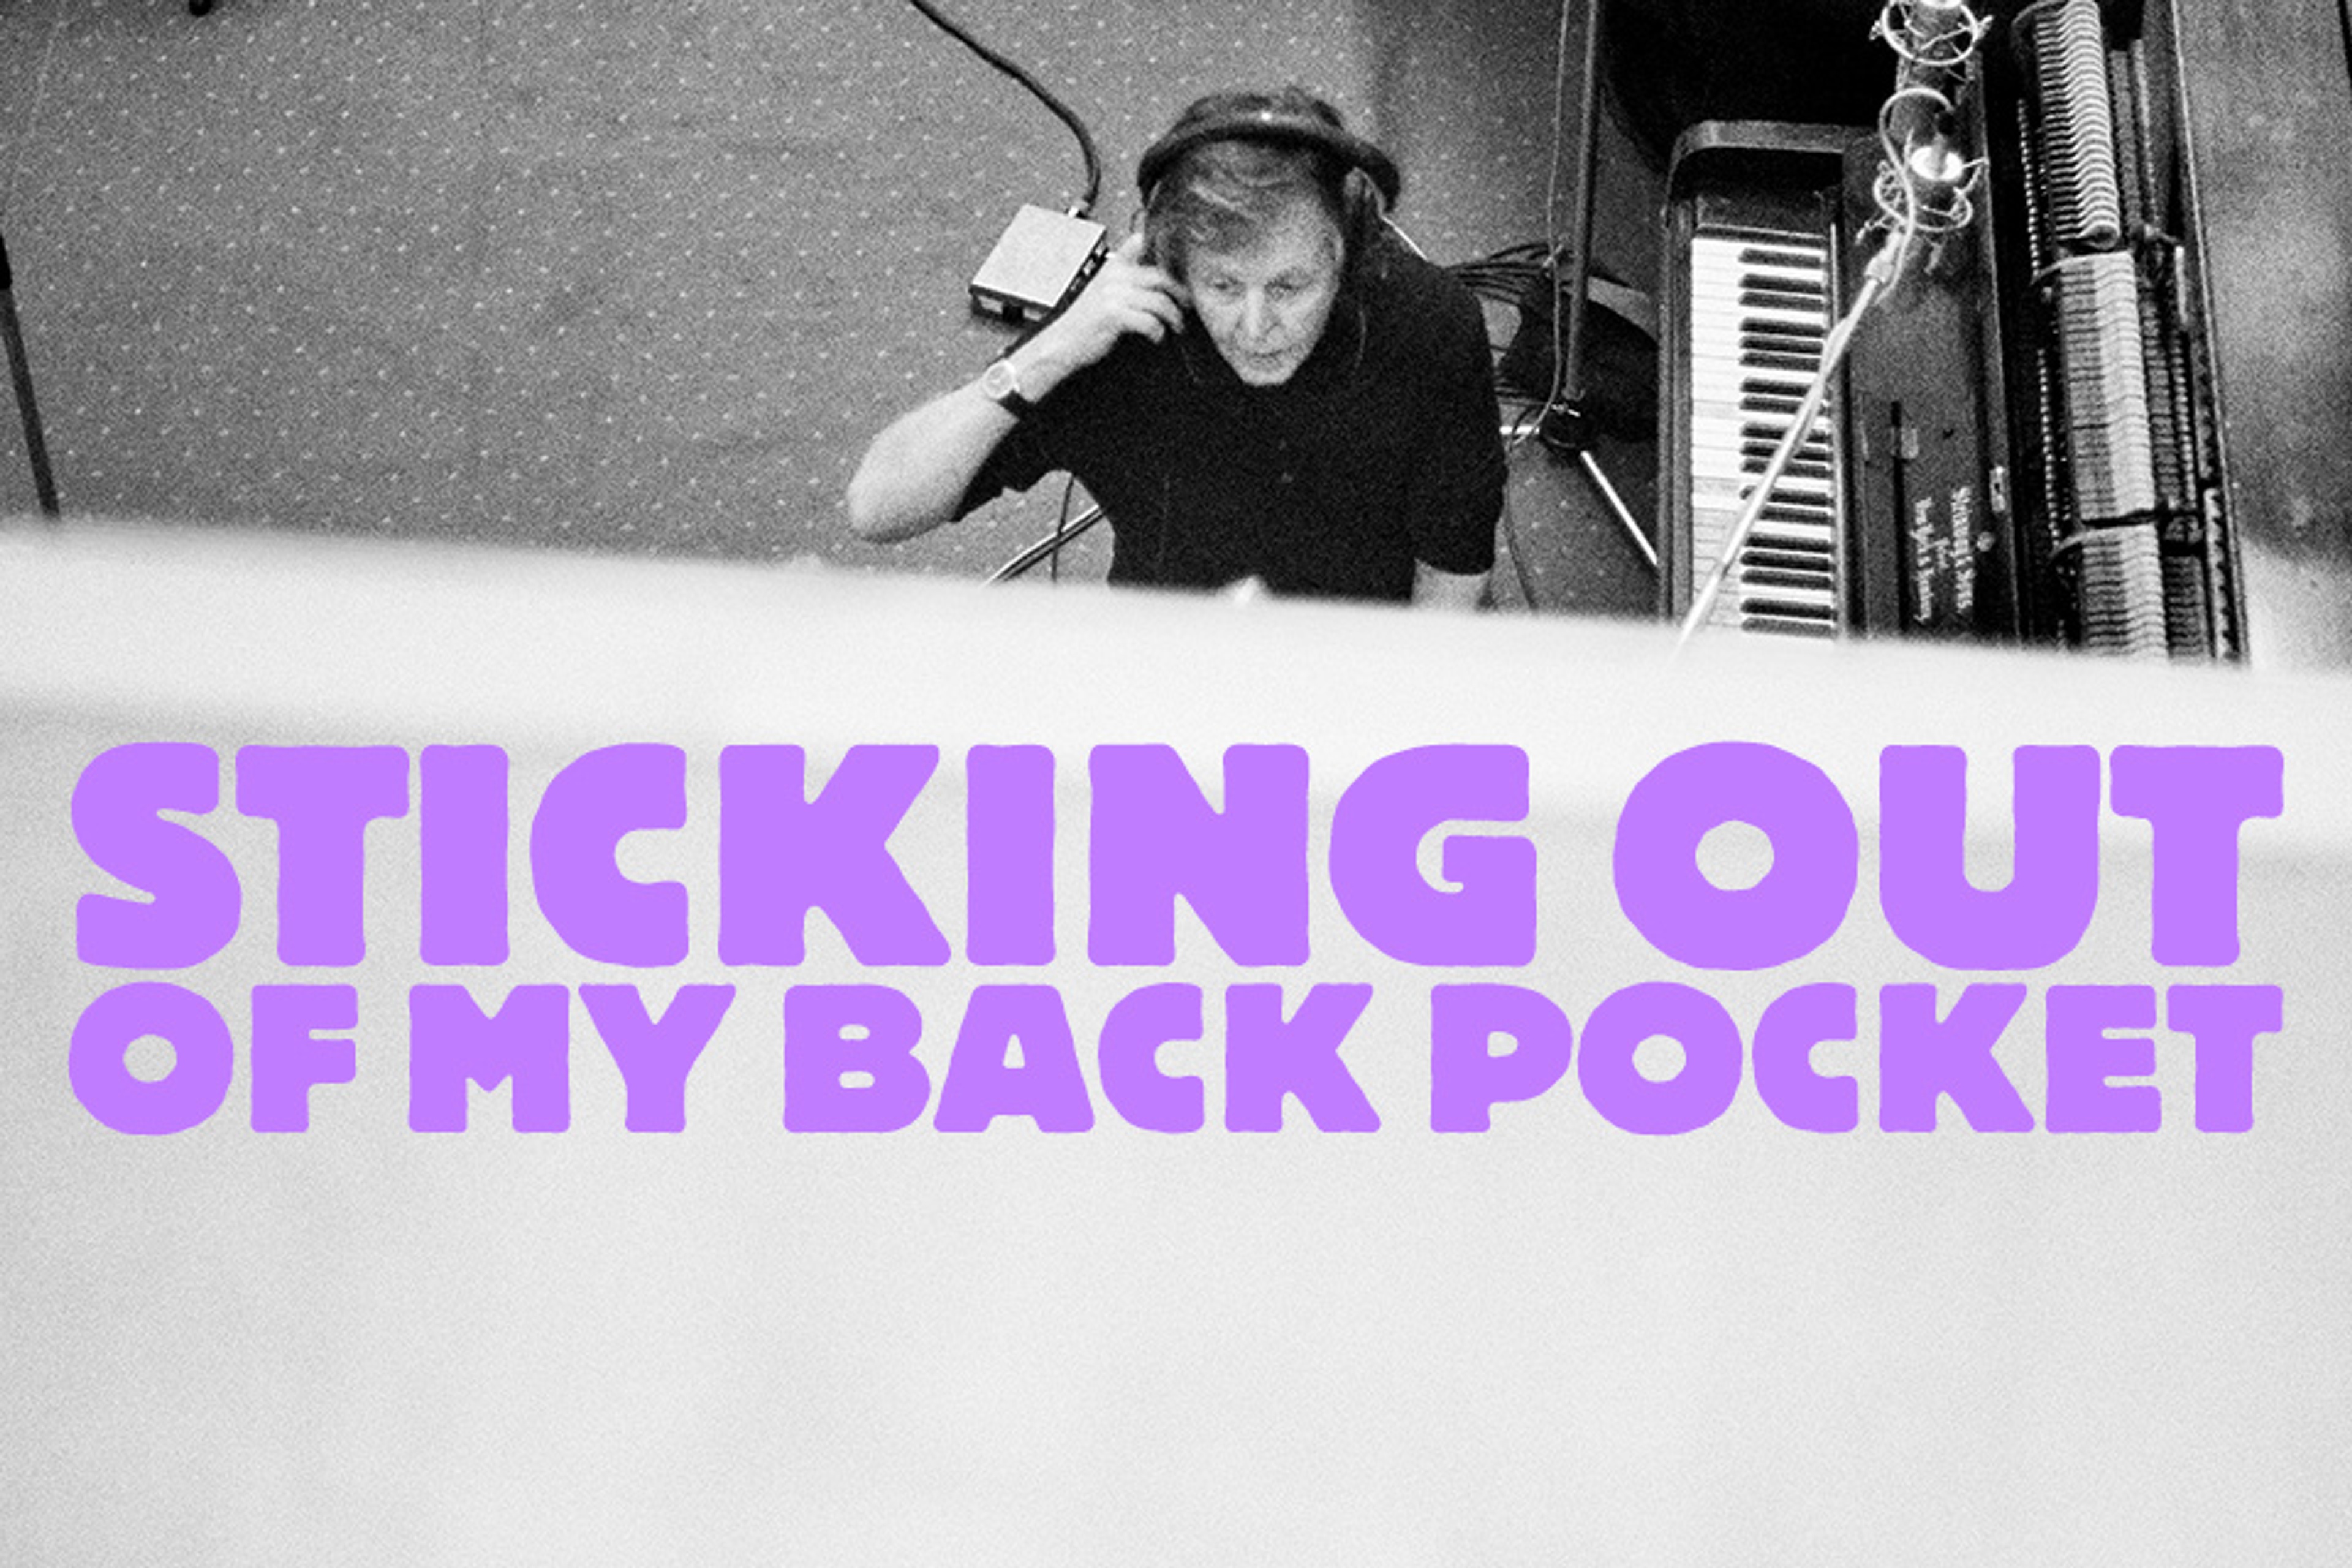 Sticking Out Of My Back Pocket playlist cover for April